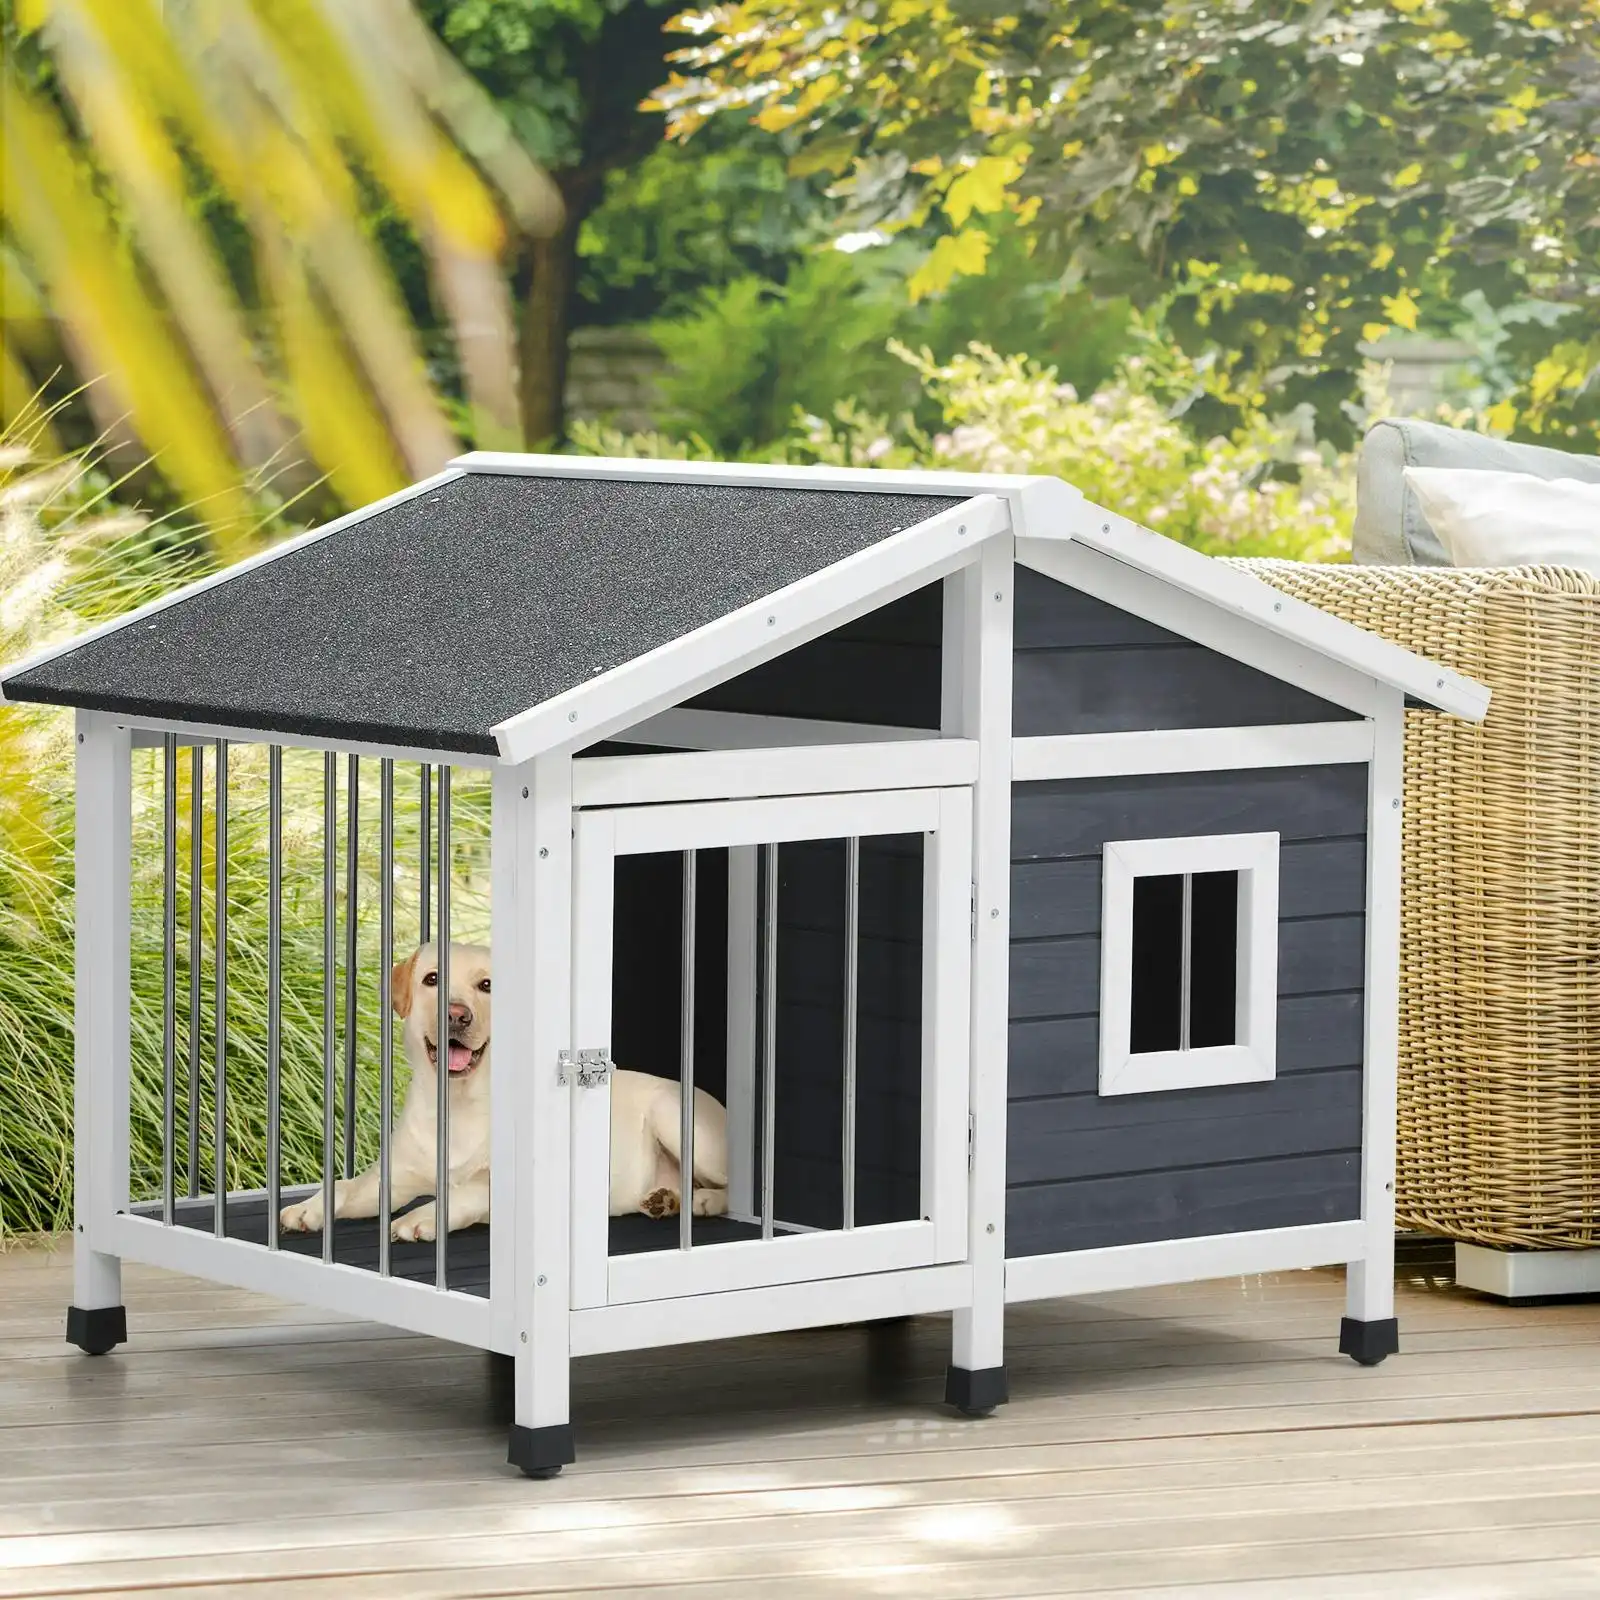 Alopet Wooden Pet Dog Kennel Awning Cabin Log Box Home Dog Cage Timber House